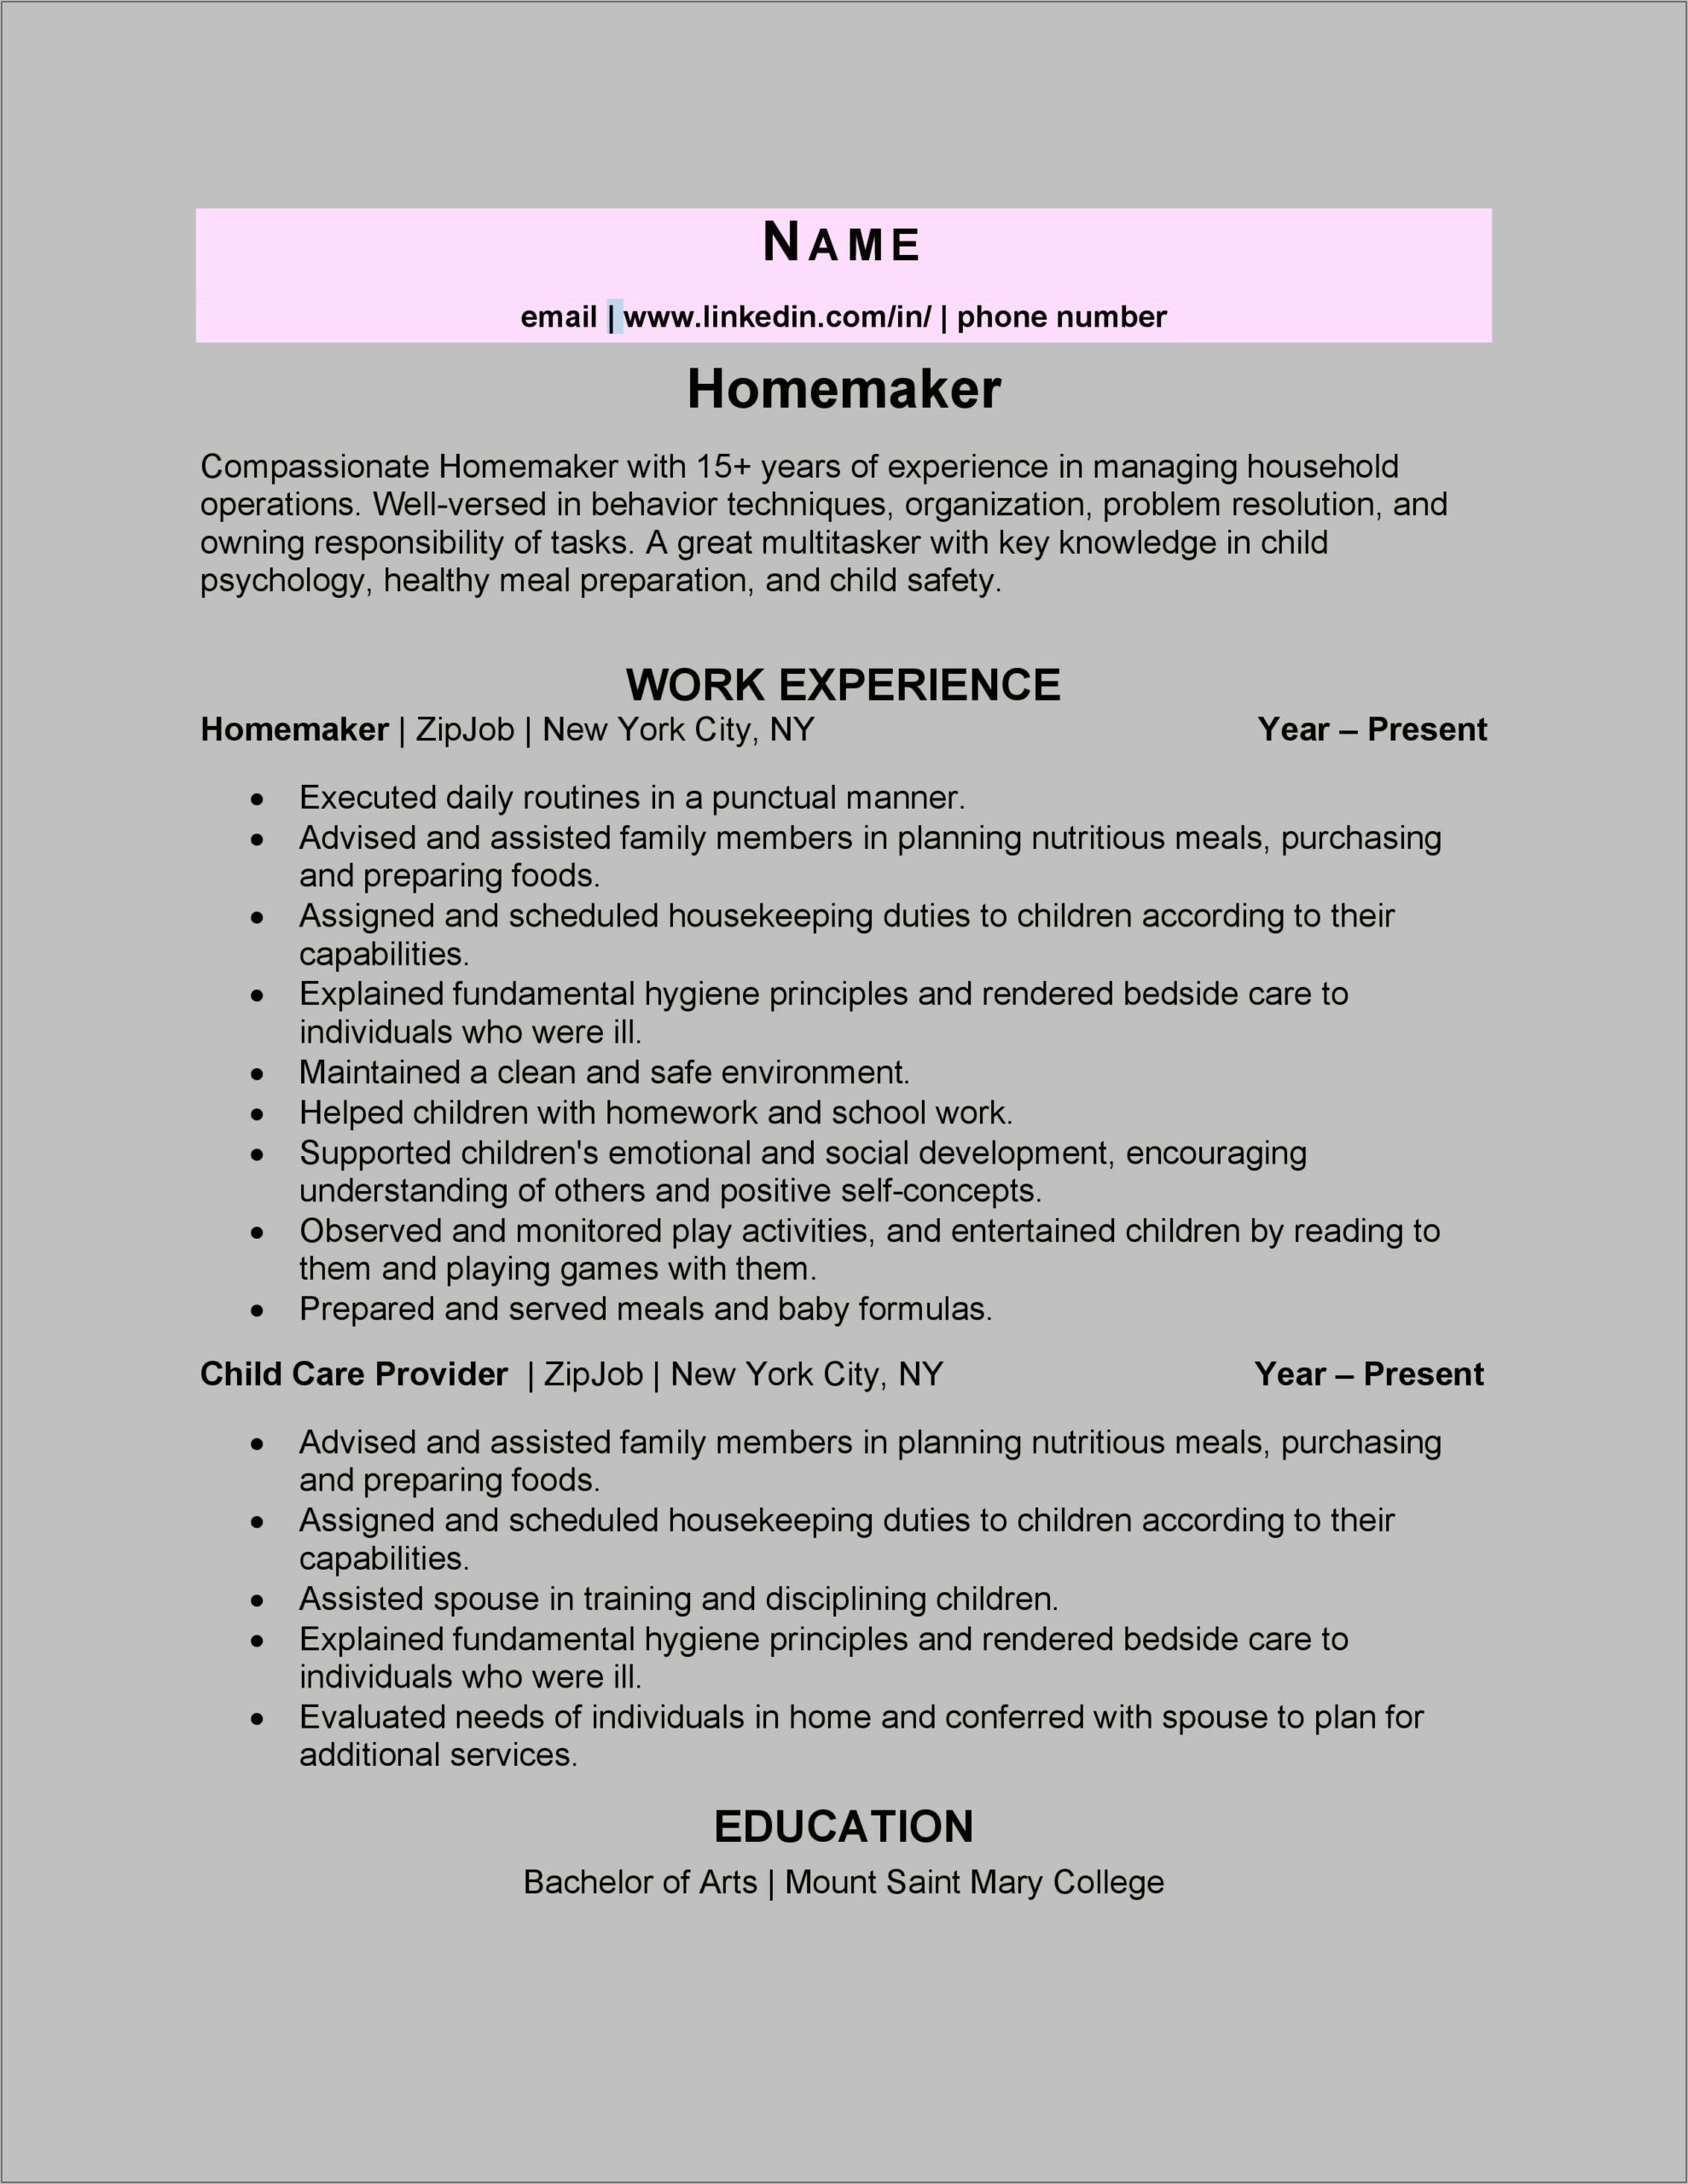 Resume For Housewife With No Work Experience